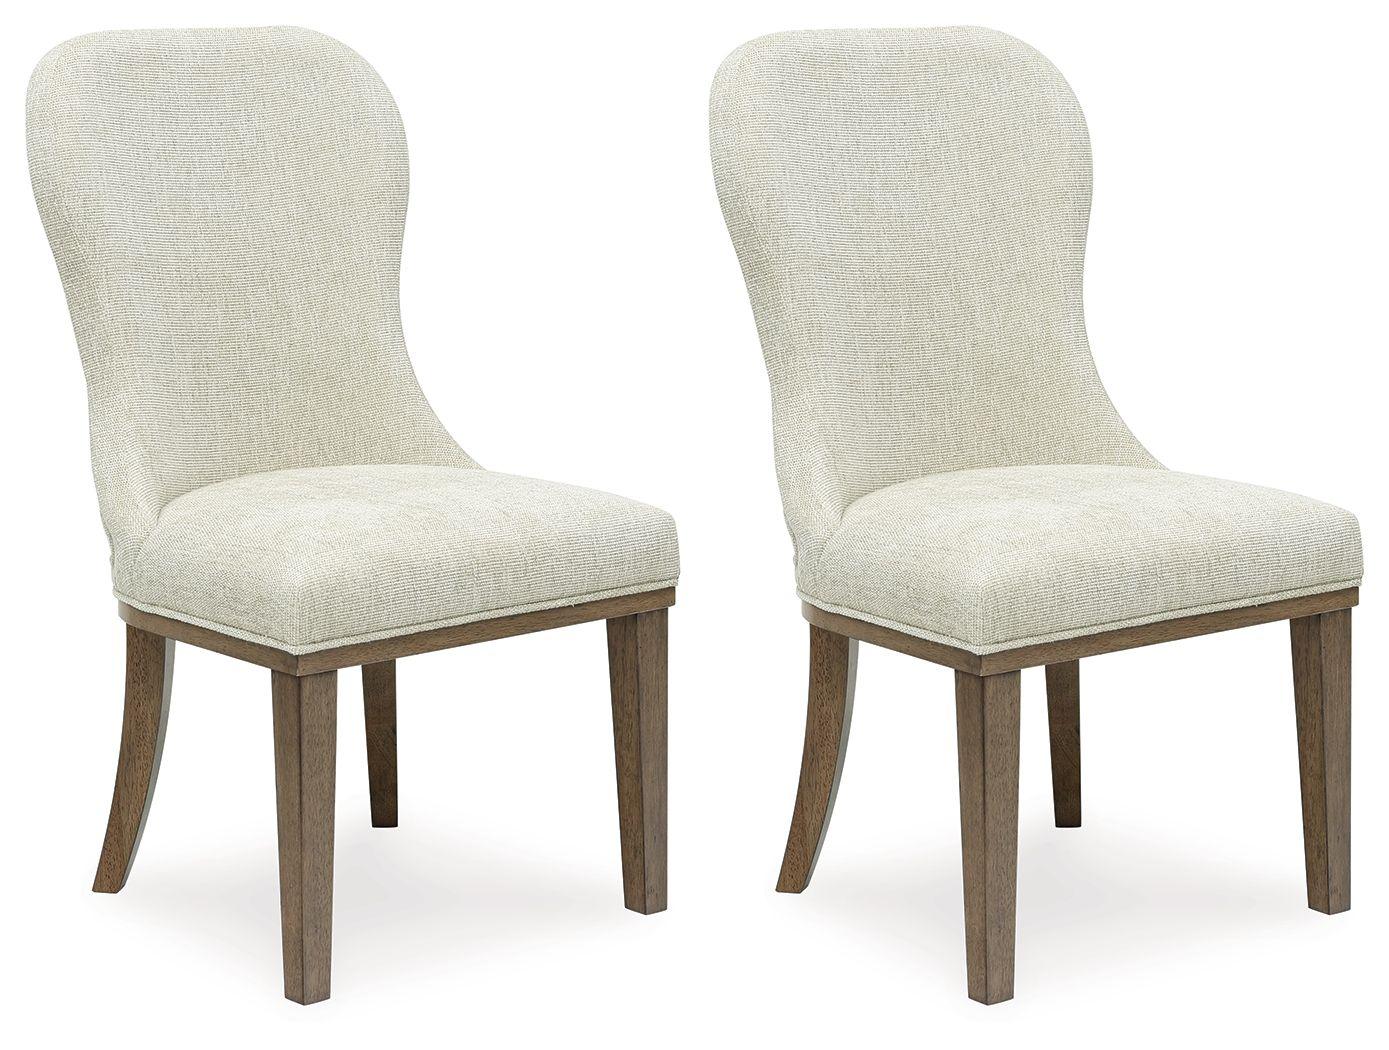 Benchcraft® - Sturlayne - Brown - Dining Upholstered Side Chair (Set of 2) - 5th Avenue Furniture